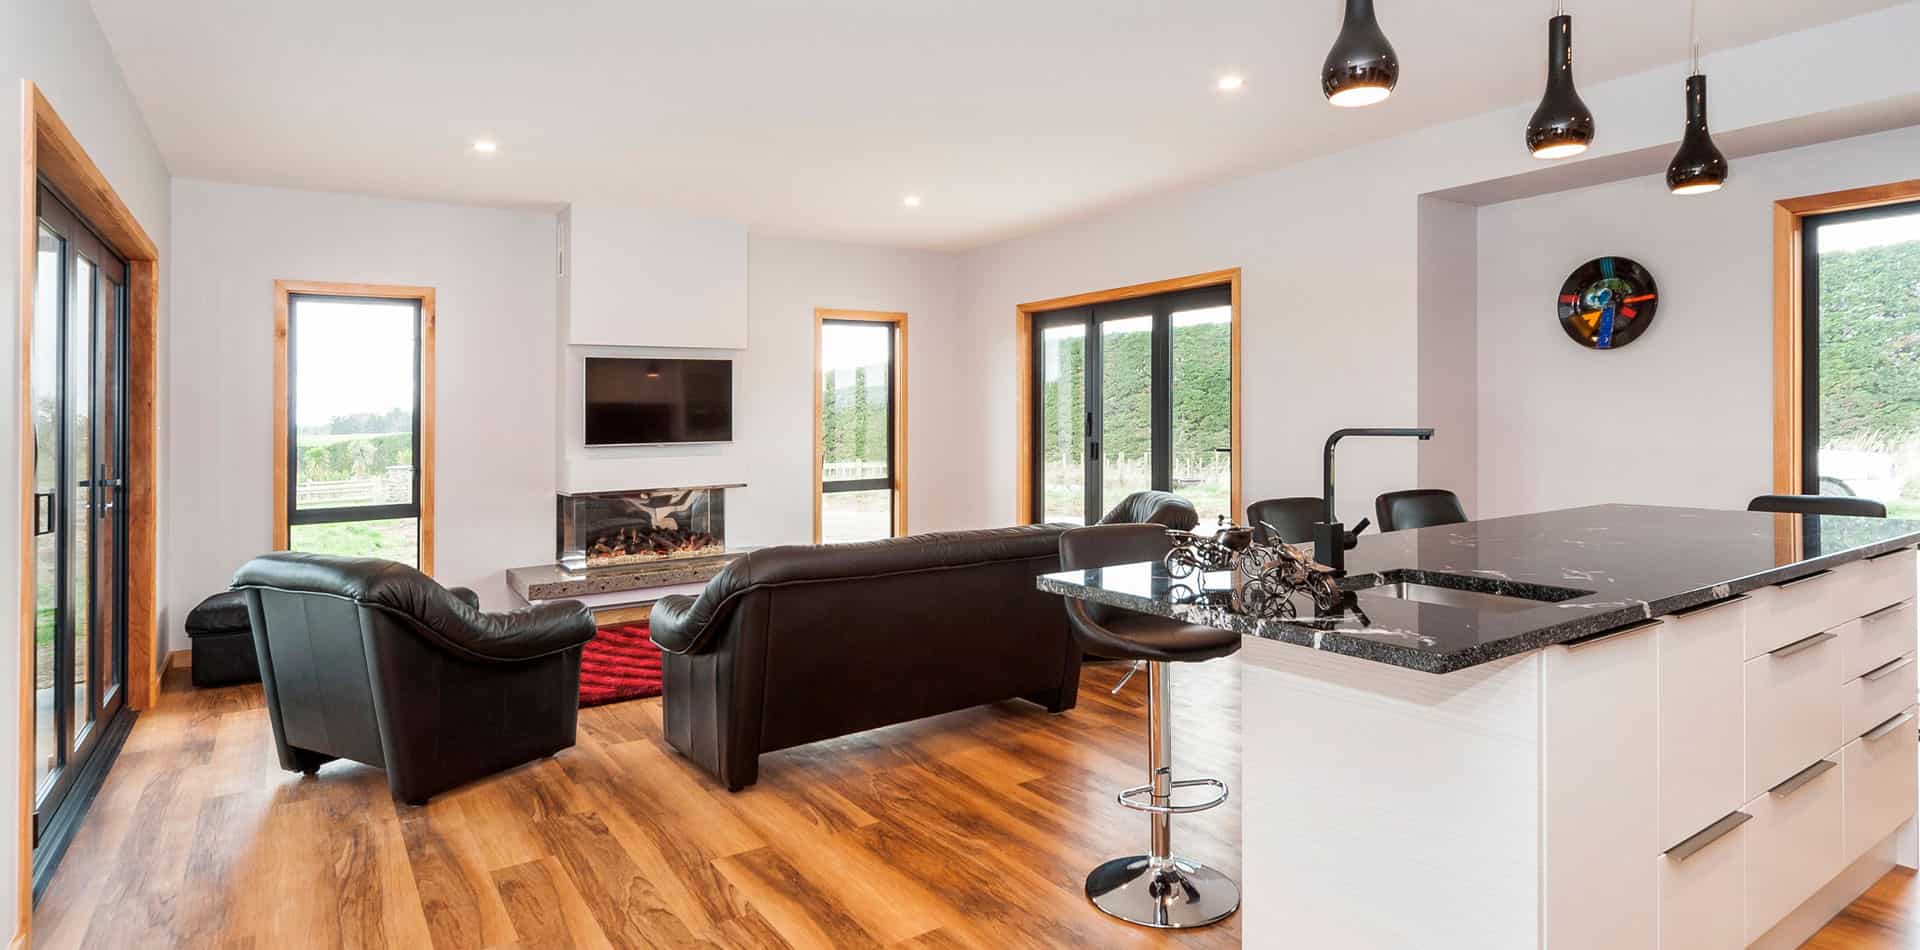 Fowler-Homes-design-and-build-new-zealand-wide-previous-builds-Manawatu-Holdaway-3